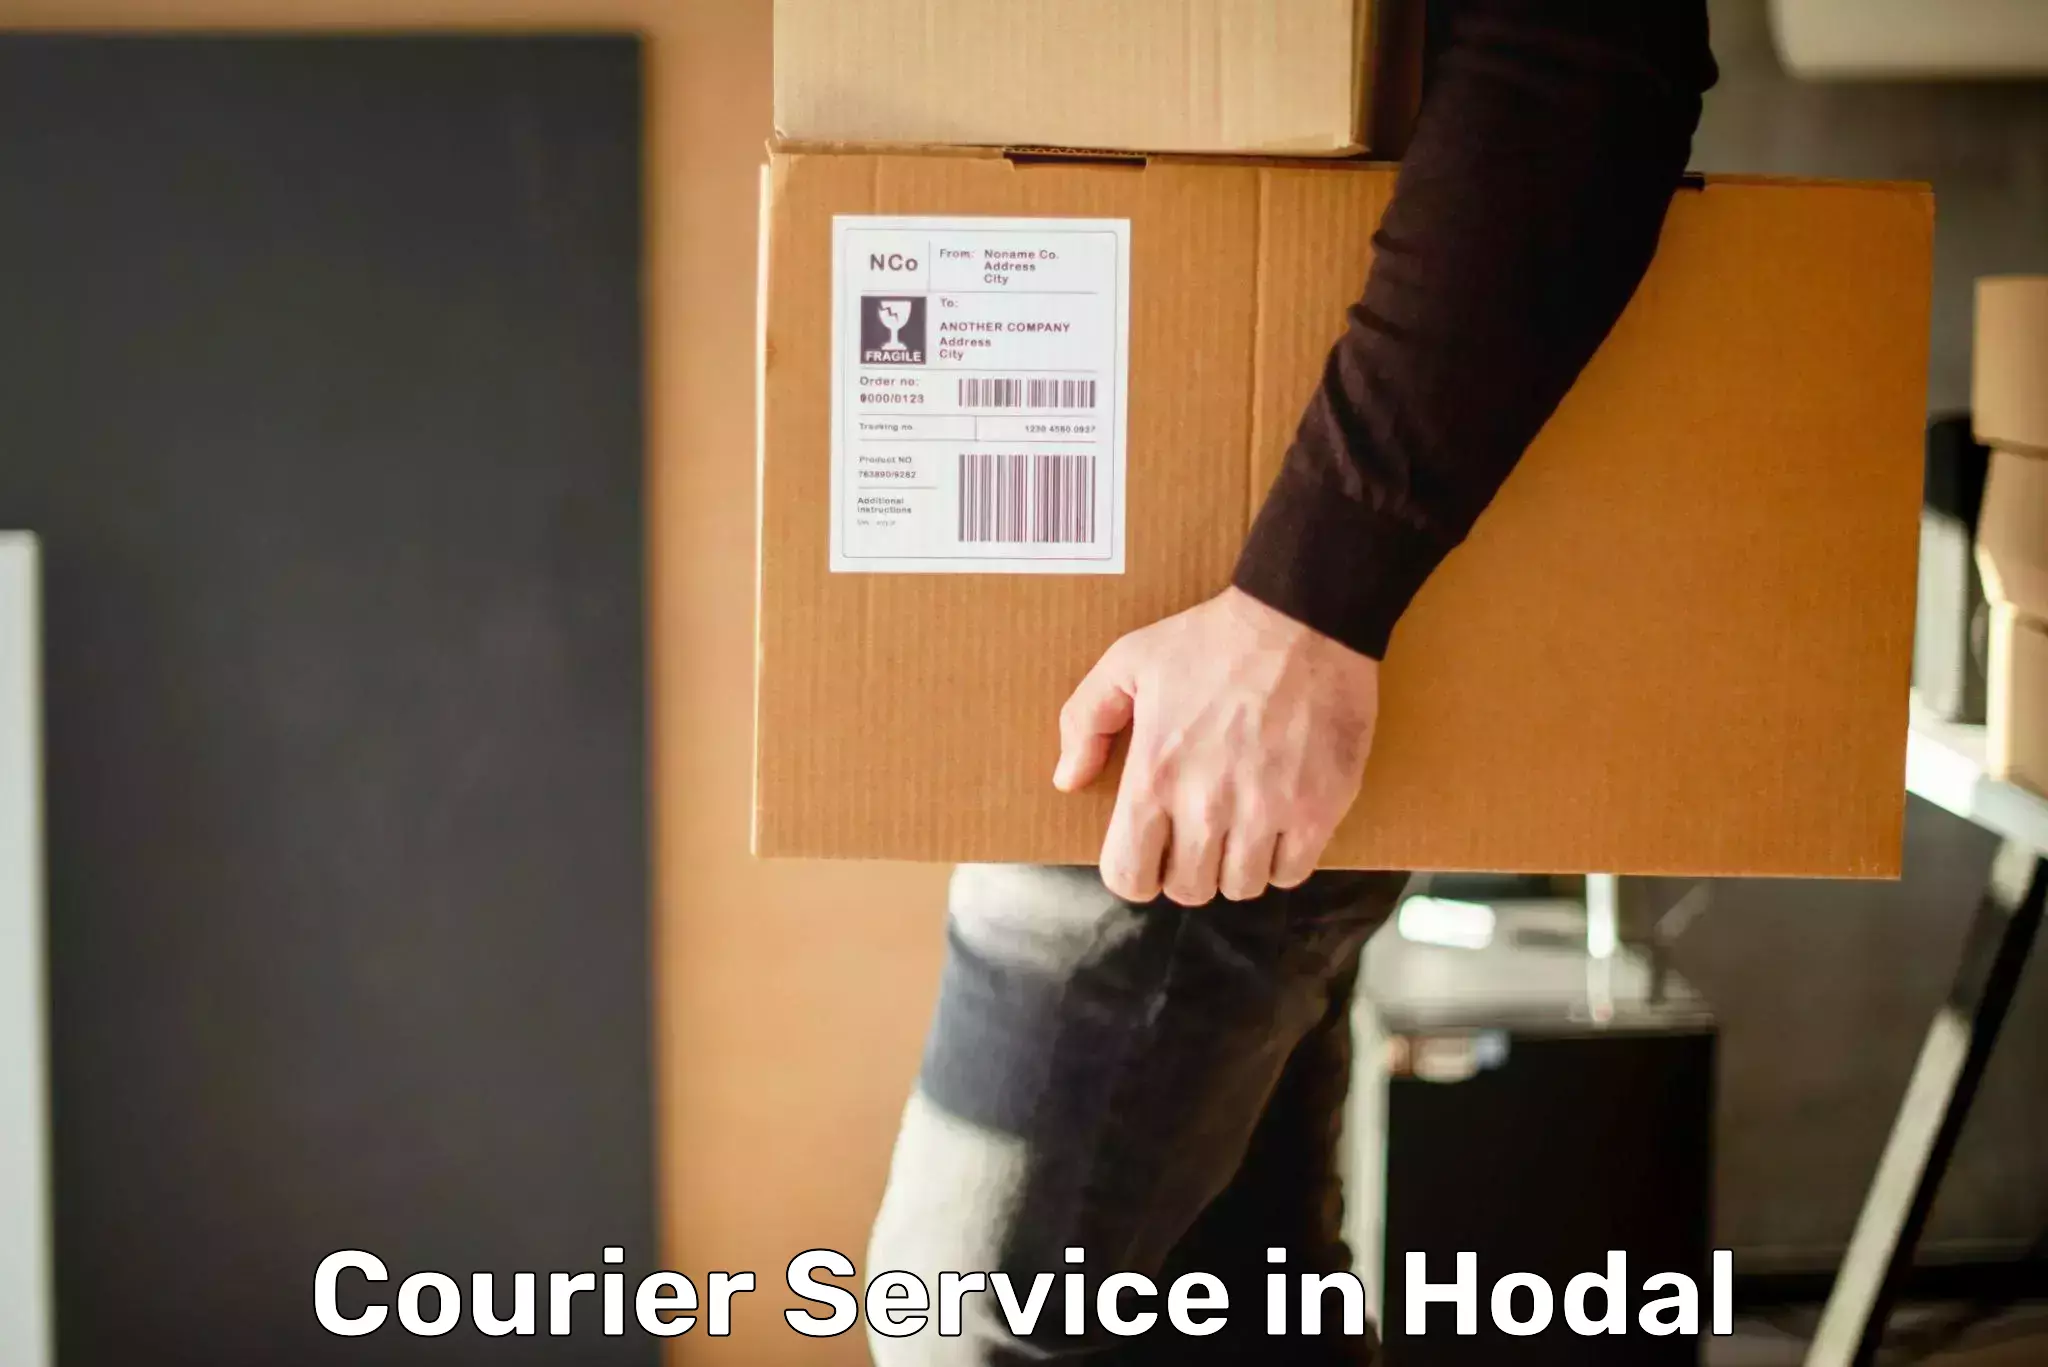 Affordable parcel service in Hodal